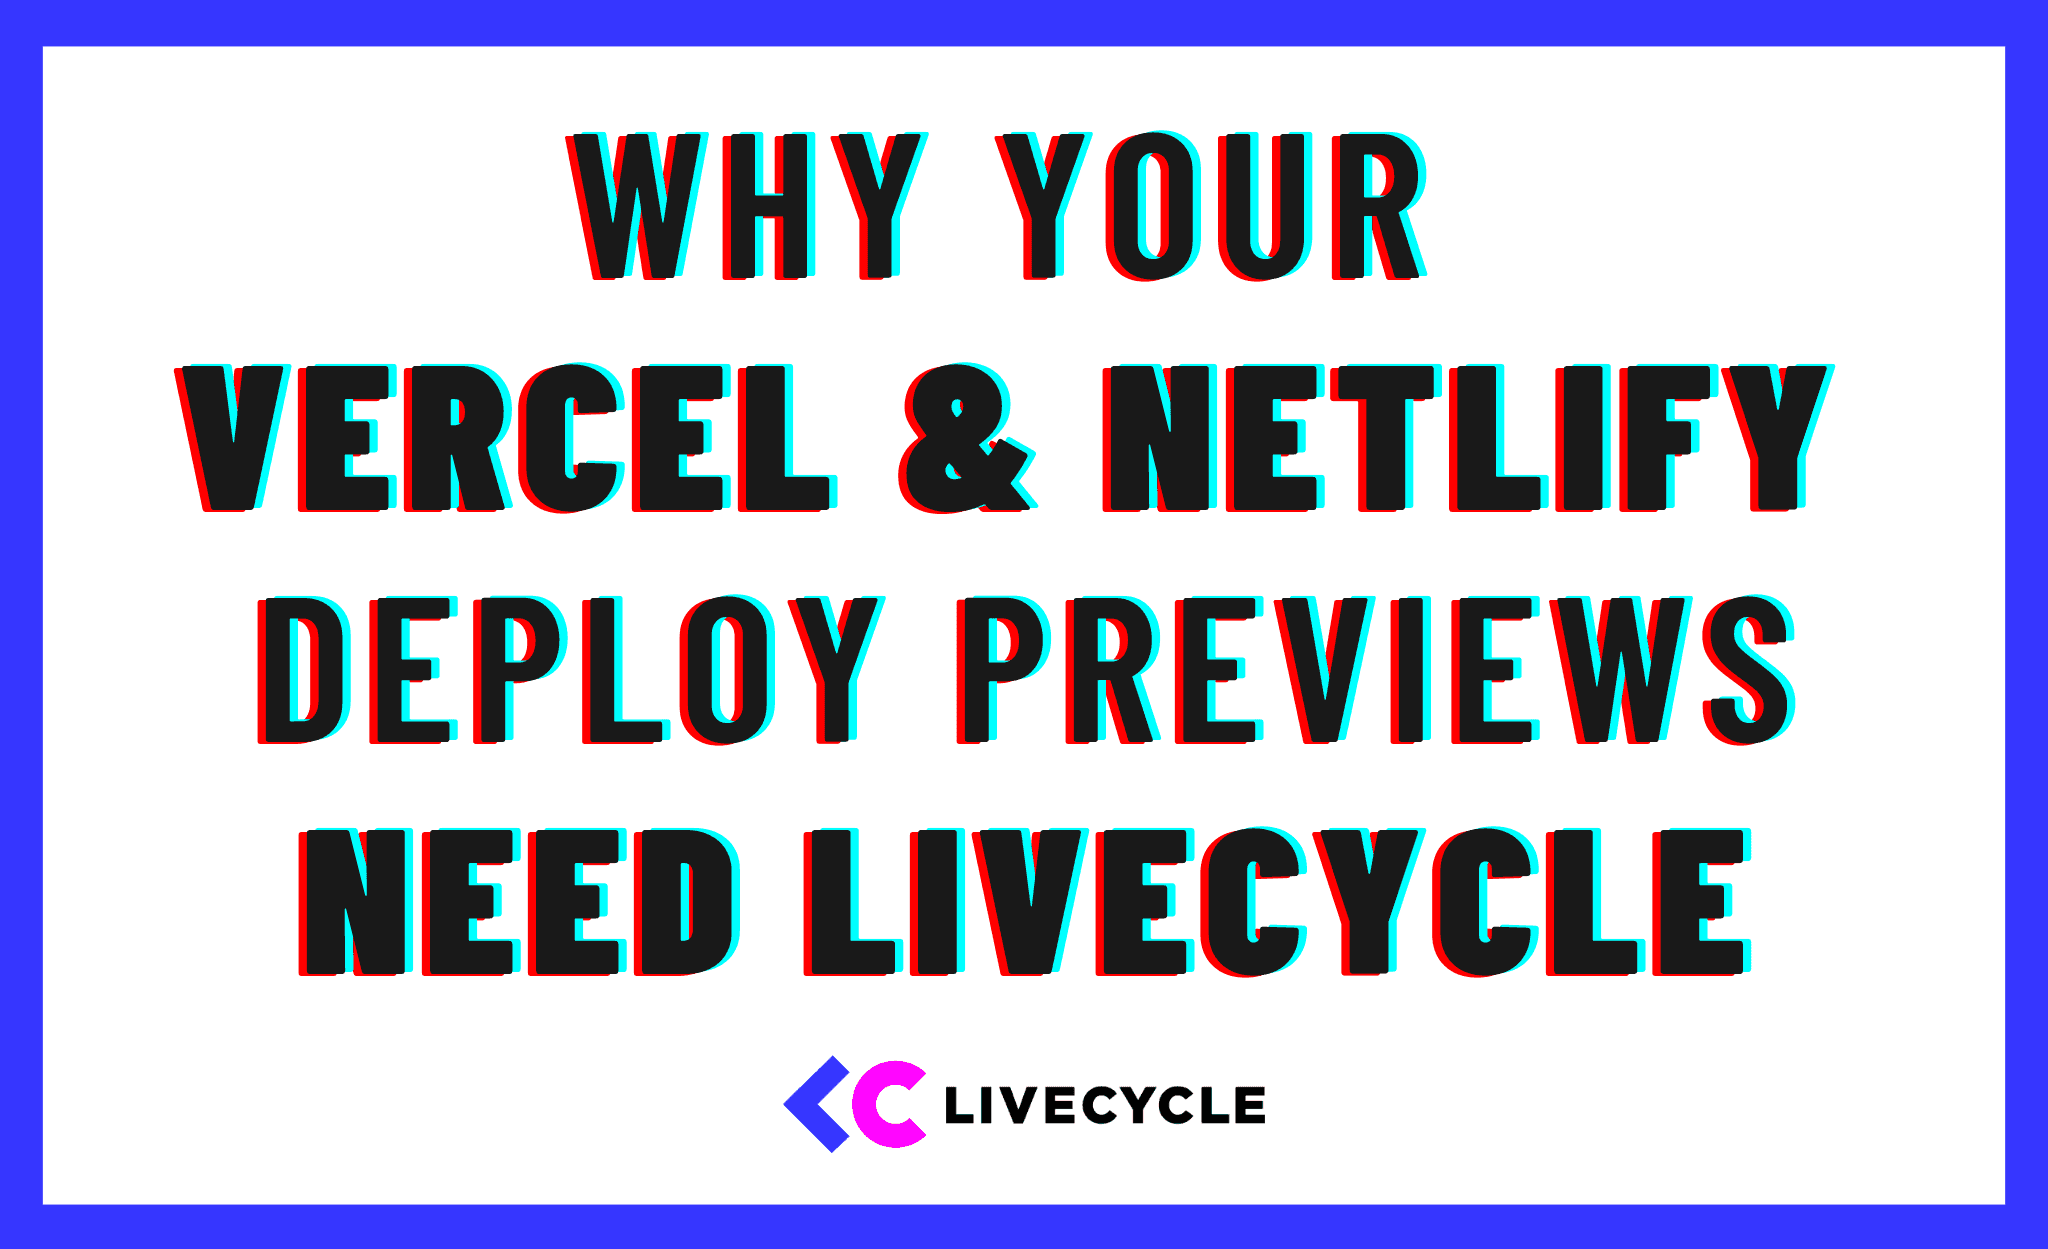 Why your Vercel & Netlify deploy previews need Livecycle